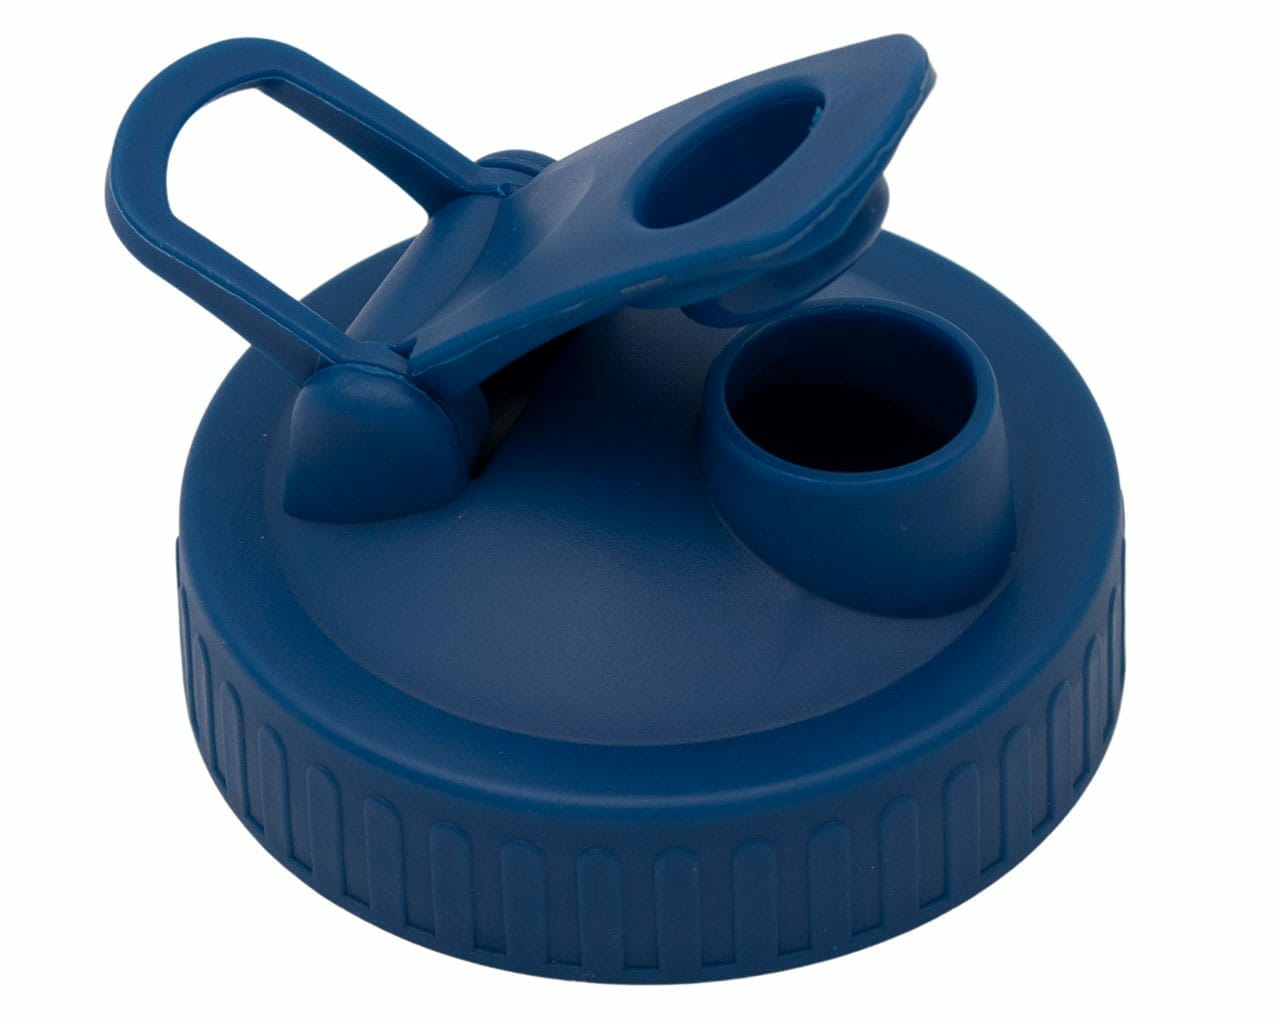 deep blue plastic pour & store lid with carry loop for regular mouth mason jars